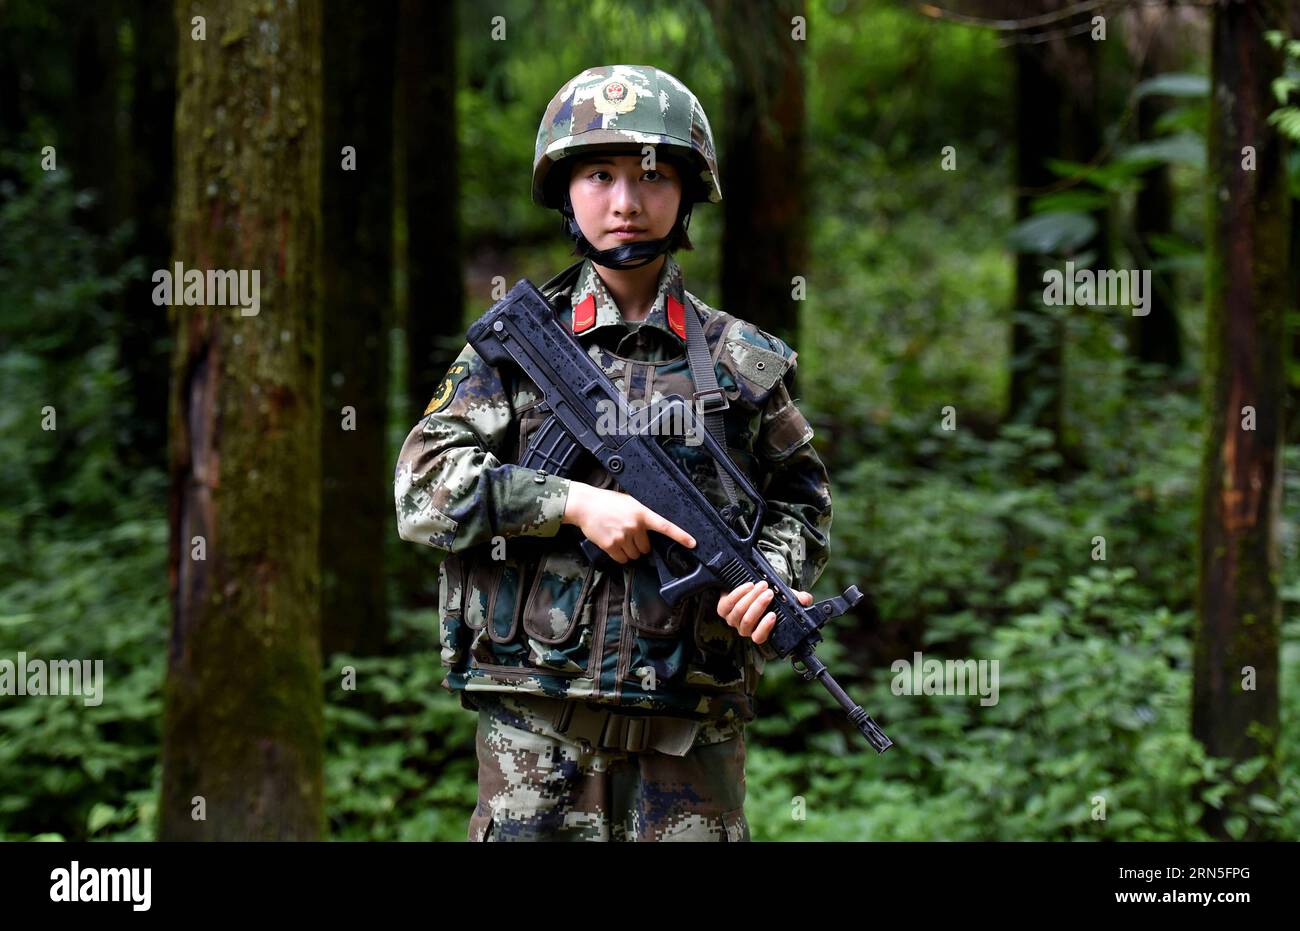 DEHONG, June 24, 2015 -- Zhang Liu takes part in a drilling in the jungle at the border area near Myanmar in Dehong Dai-Jingpo Autonomous Prefecture, southwest China s Yunnan Province, June 24, 2015. Born in 1995, Zhang Liu became an anti-drug soldier in border checkpoint of Mukang in 2013. Grown up in an affluent family in central China s Hunan Province, Zhang said that being a soldier had always been her dream, which drove her to join the army after graduating from high school. Being a front line anti-drug force, the border checkpoint of Mukang has captured about 100 kilograms of drugs since Stock Photo